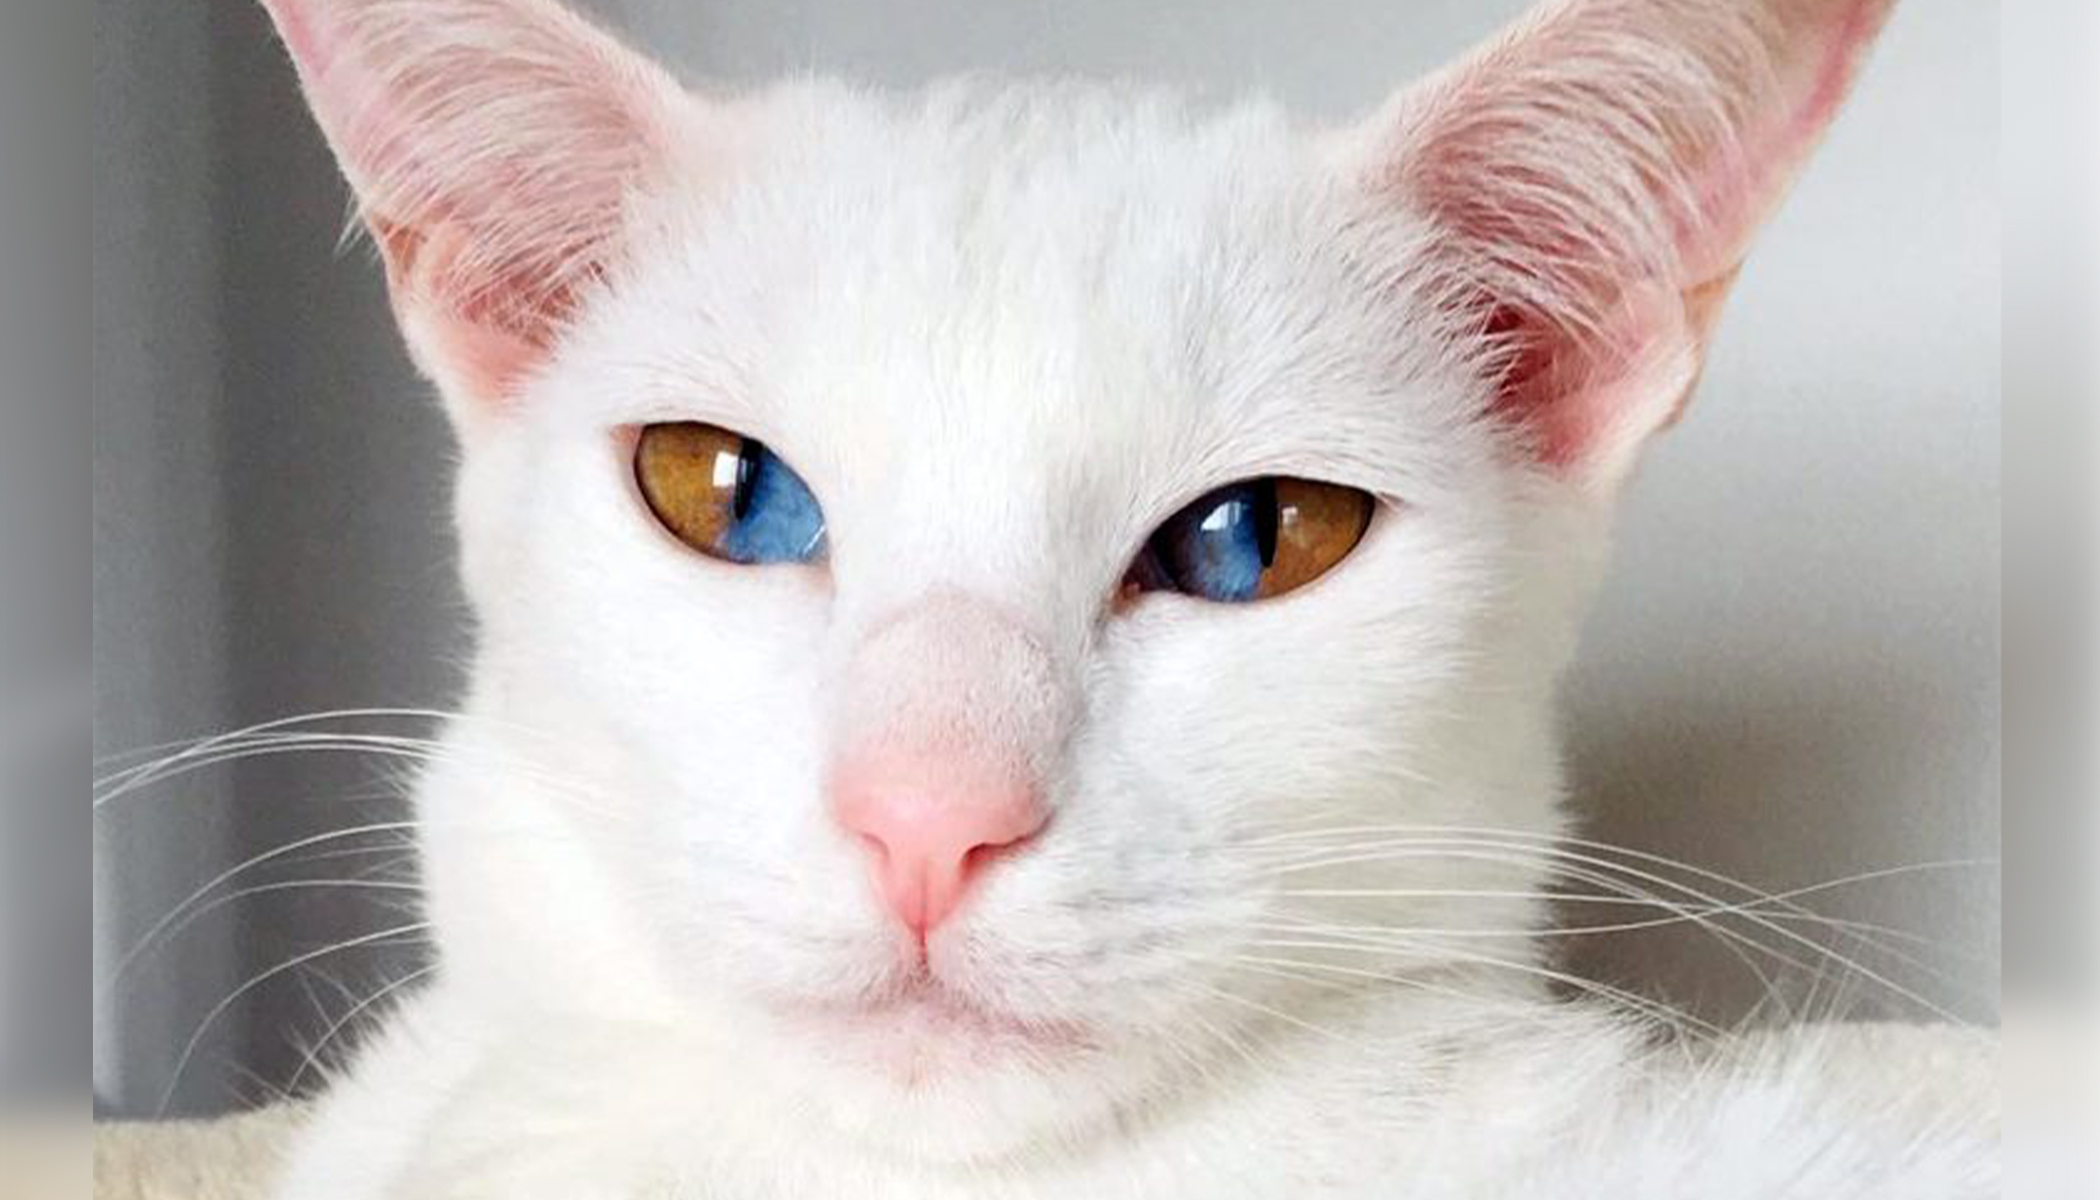 Meet This Stunning White Cat With Rare Genetic Condition That Has Striking Two Colored Eyes